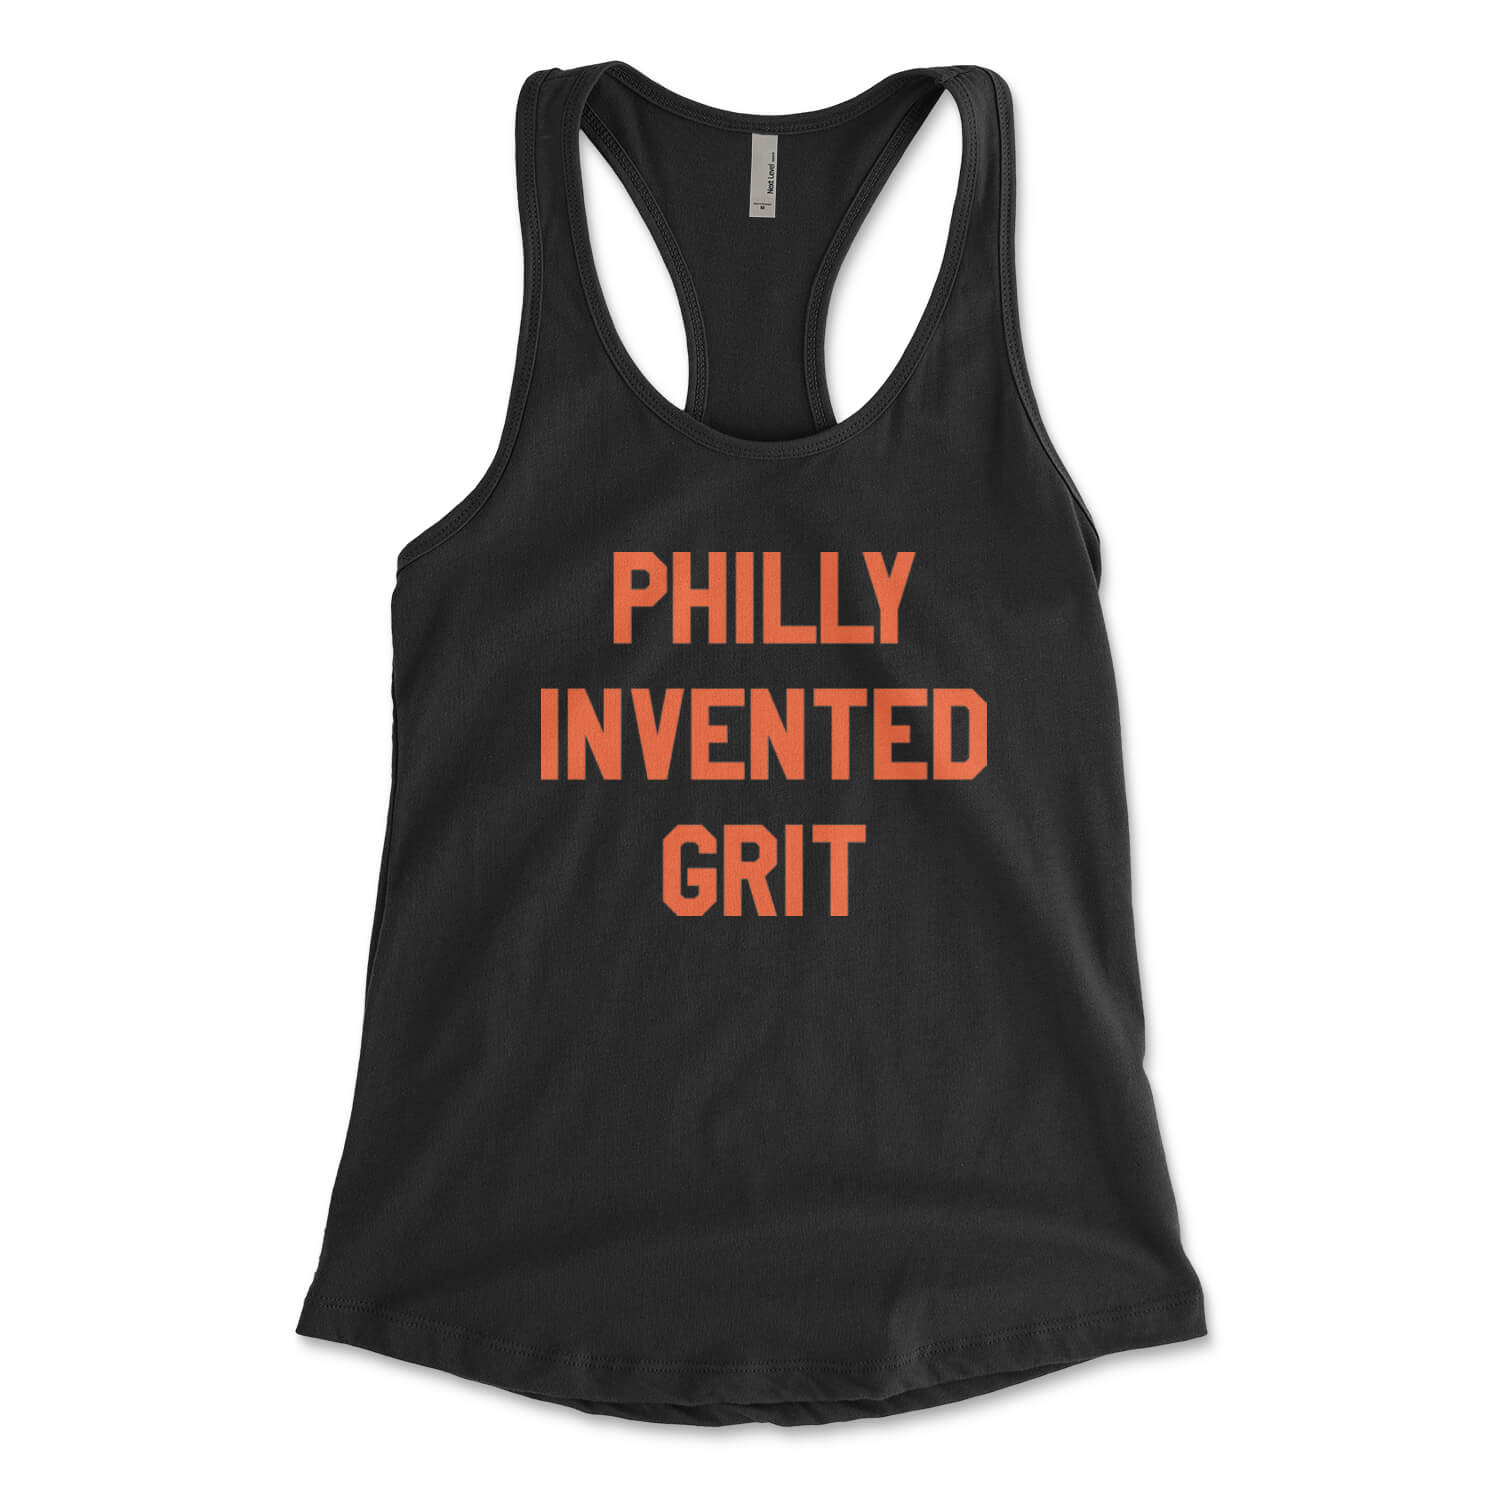 Philly invented grit black womens racerback tank top from Phillygoat